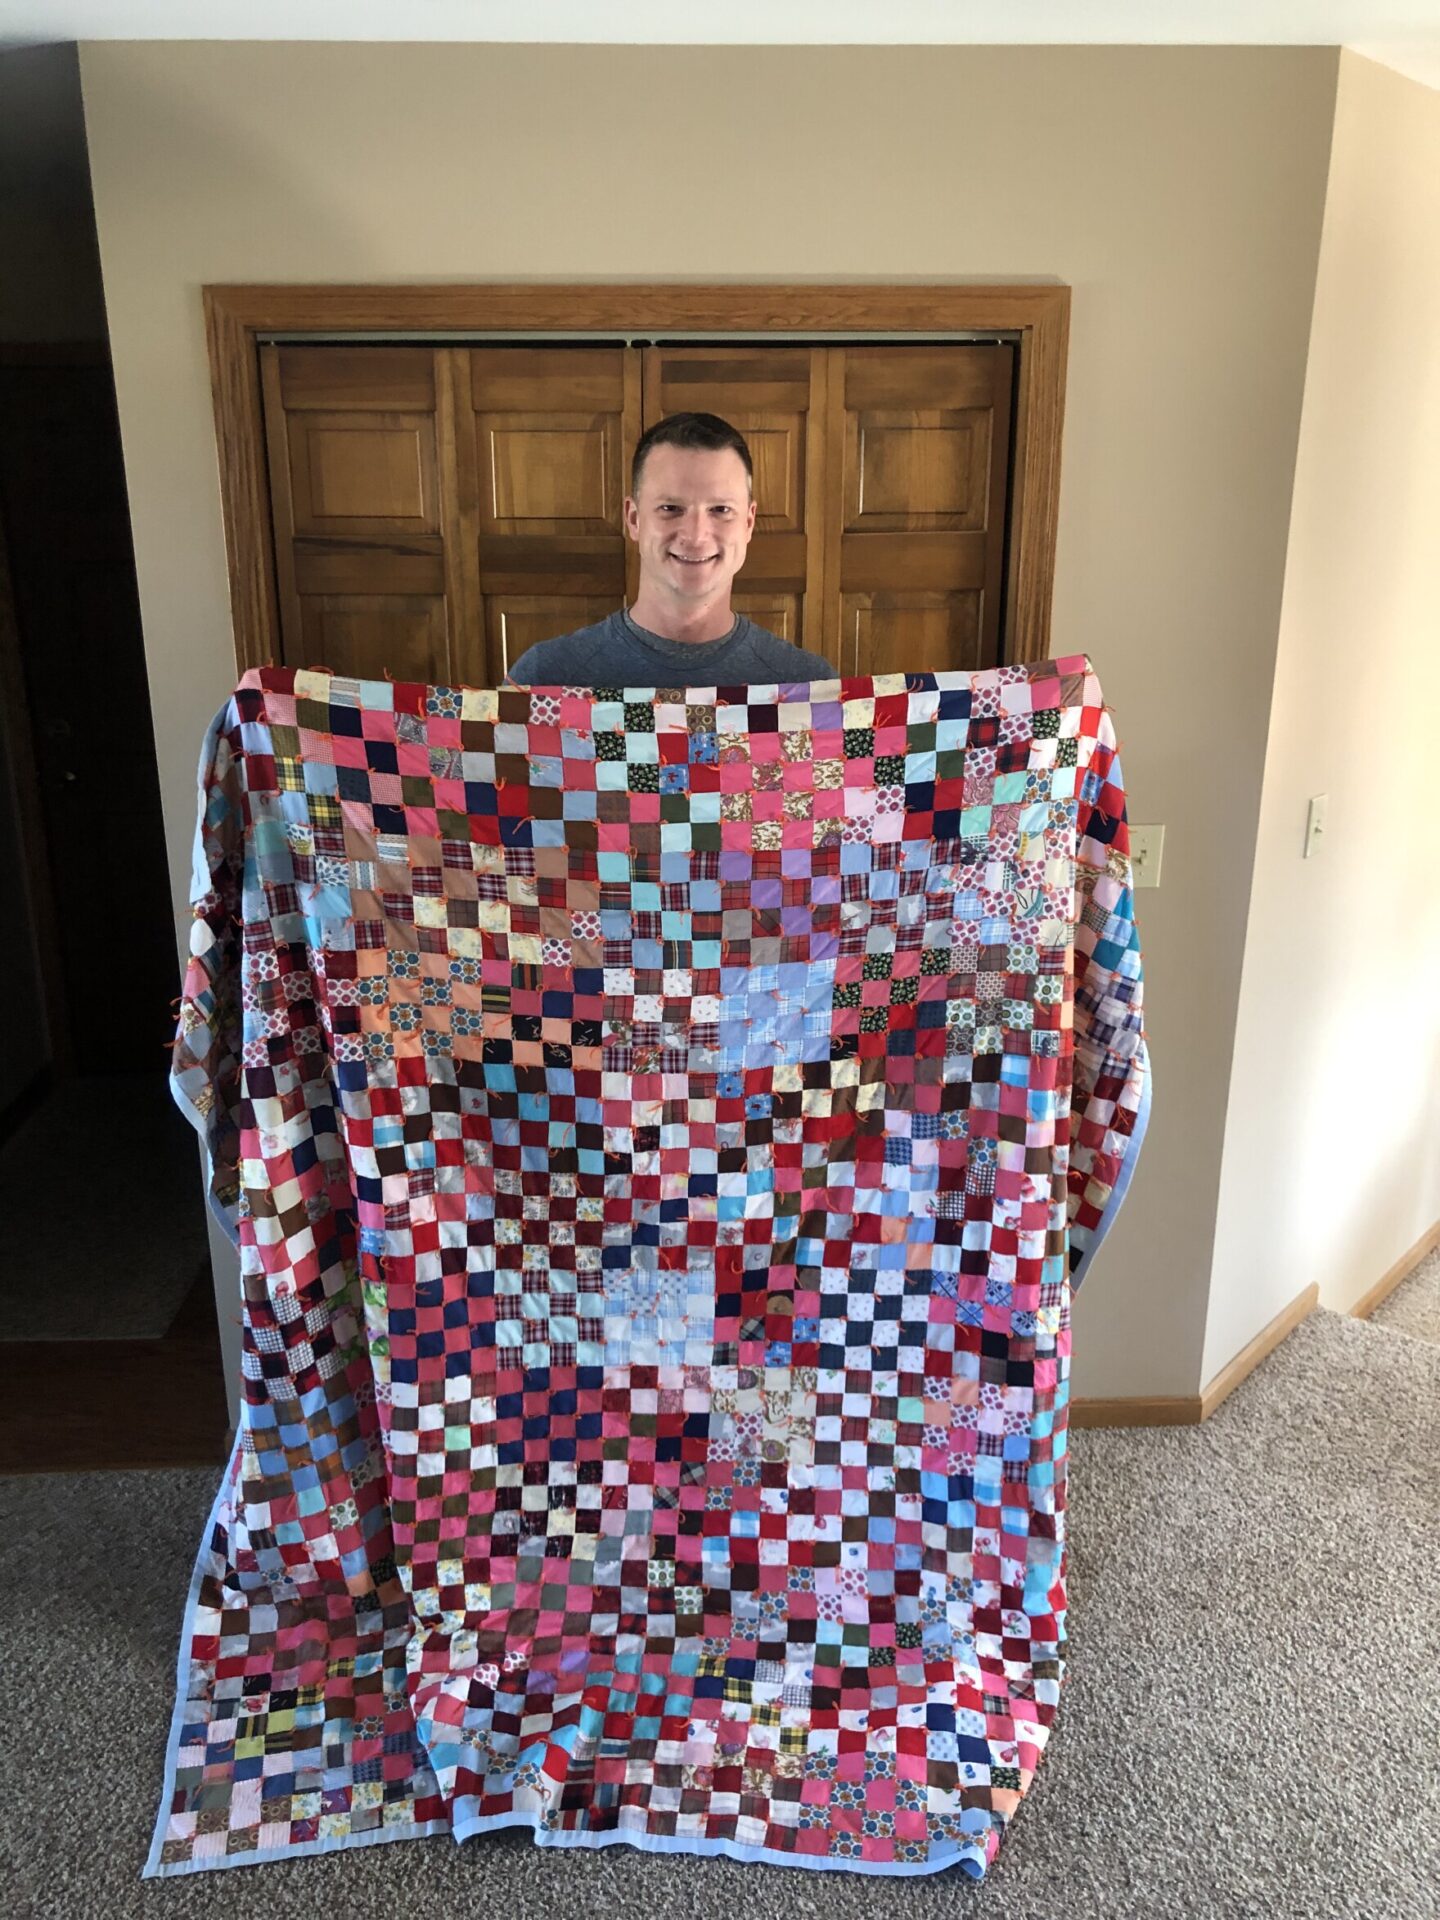 New Quilter Learns Family Tradition With Help From YouTube